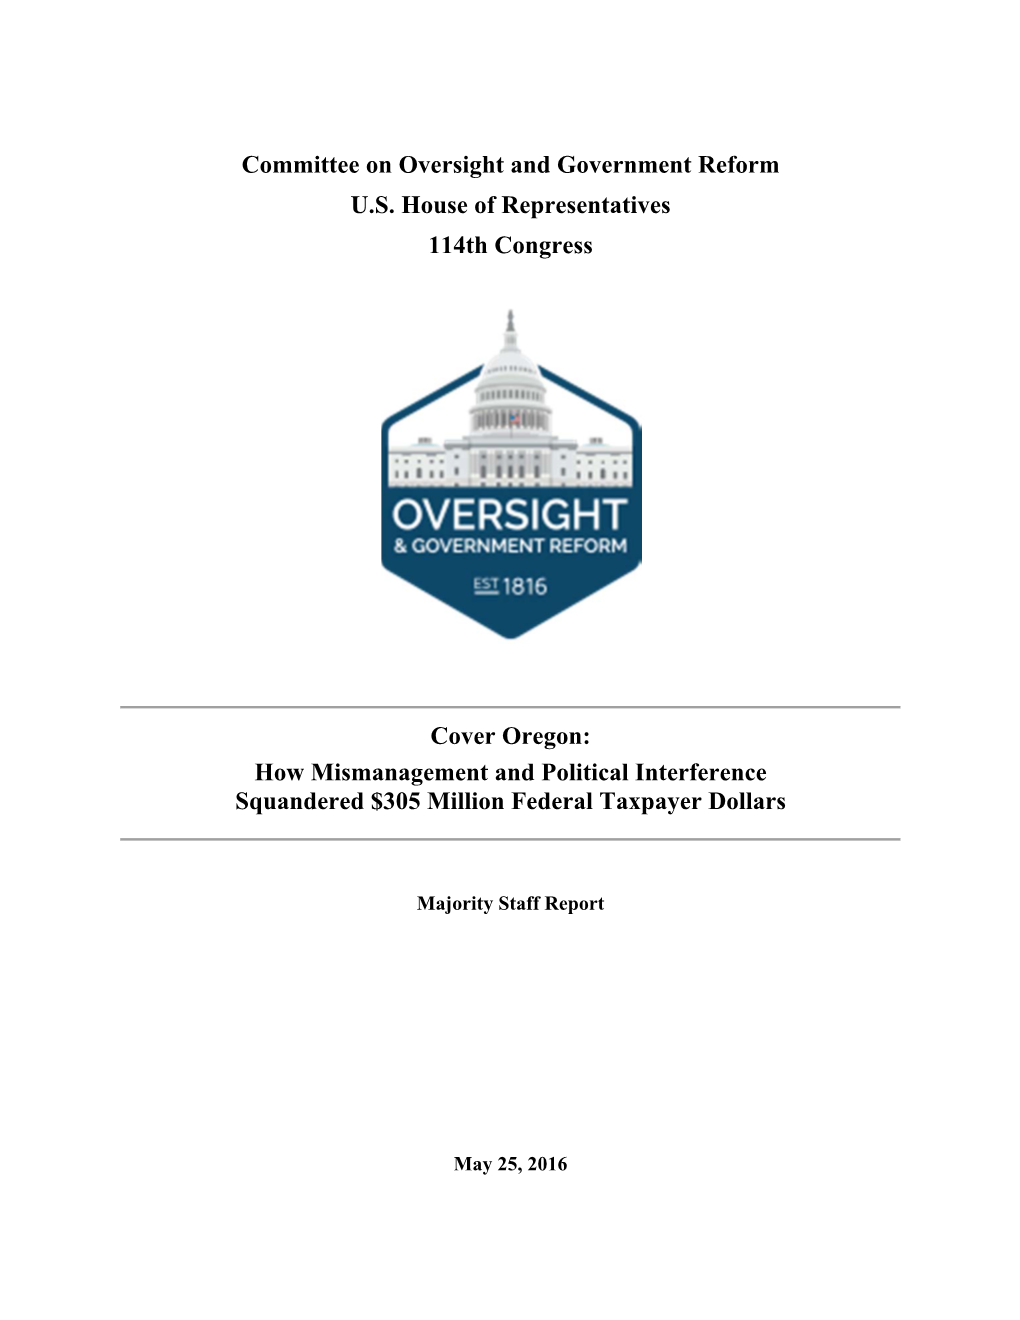 Committee on Oversight and Government Reform U.S. House Of